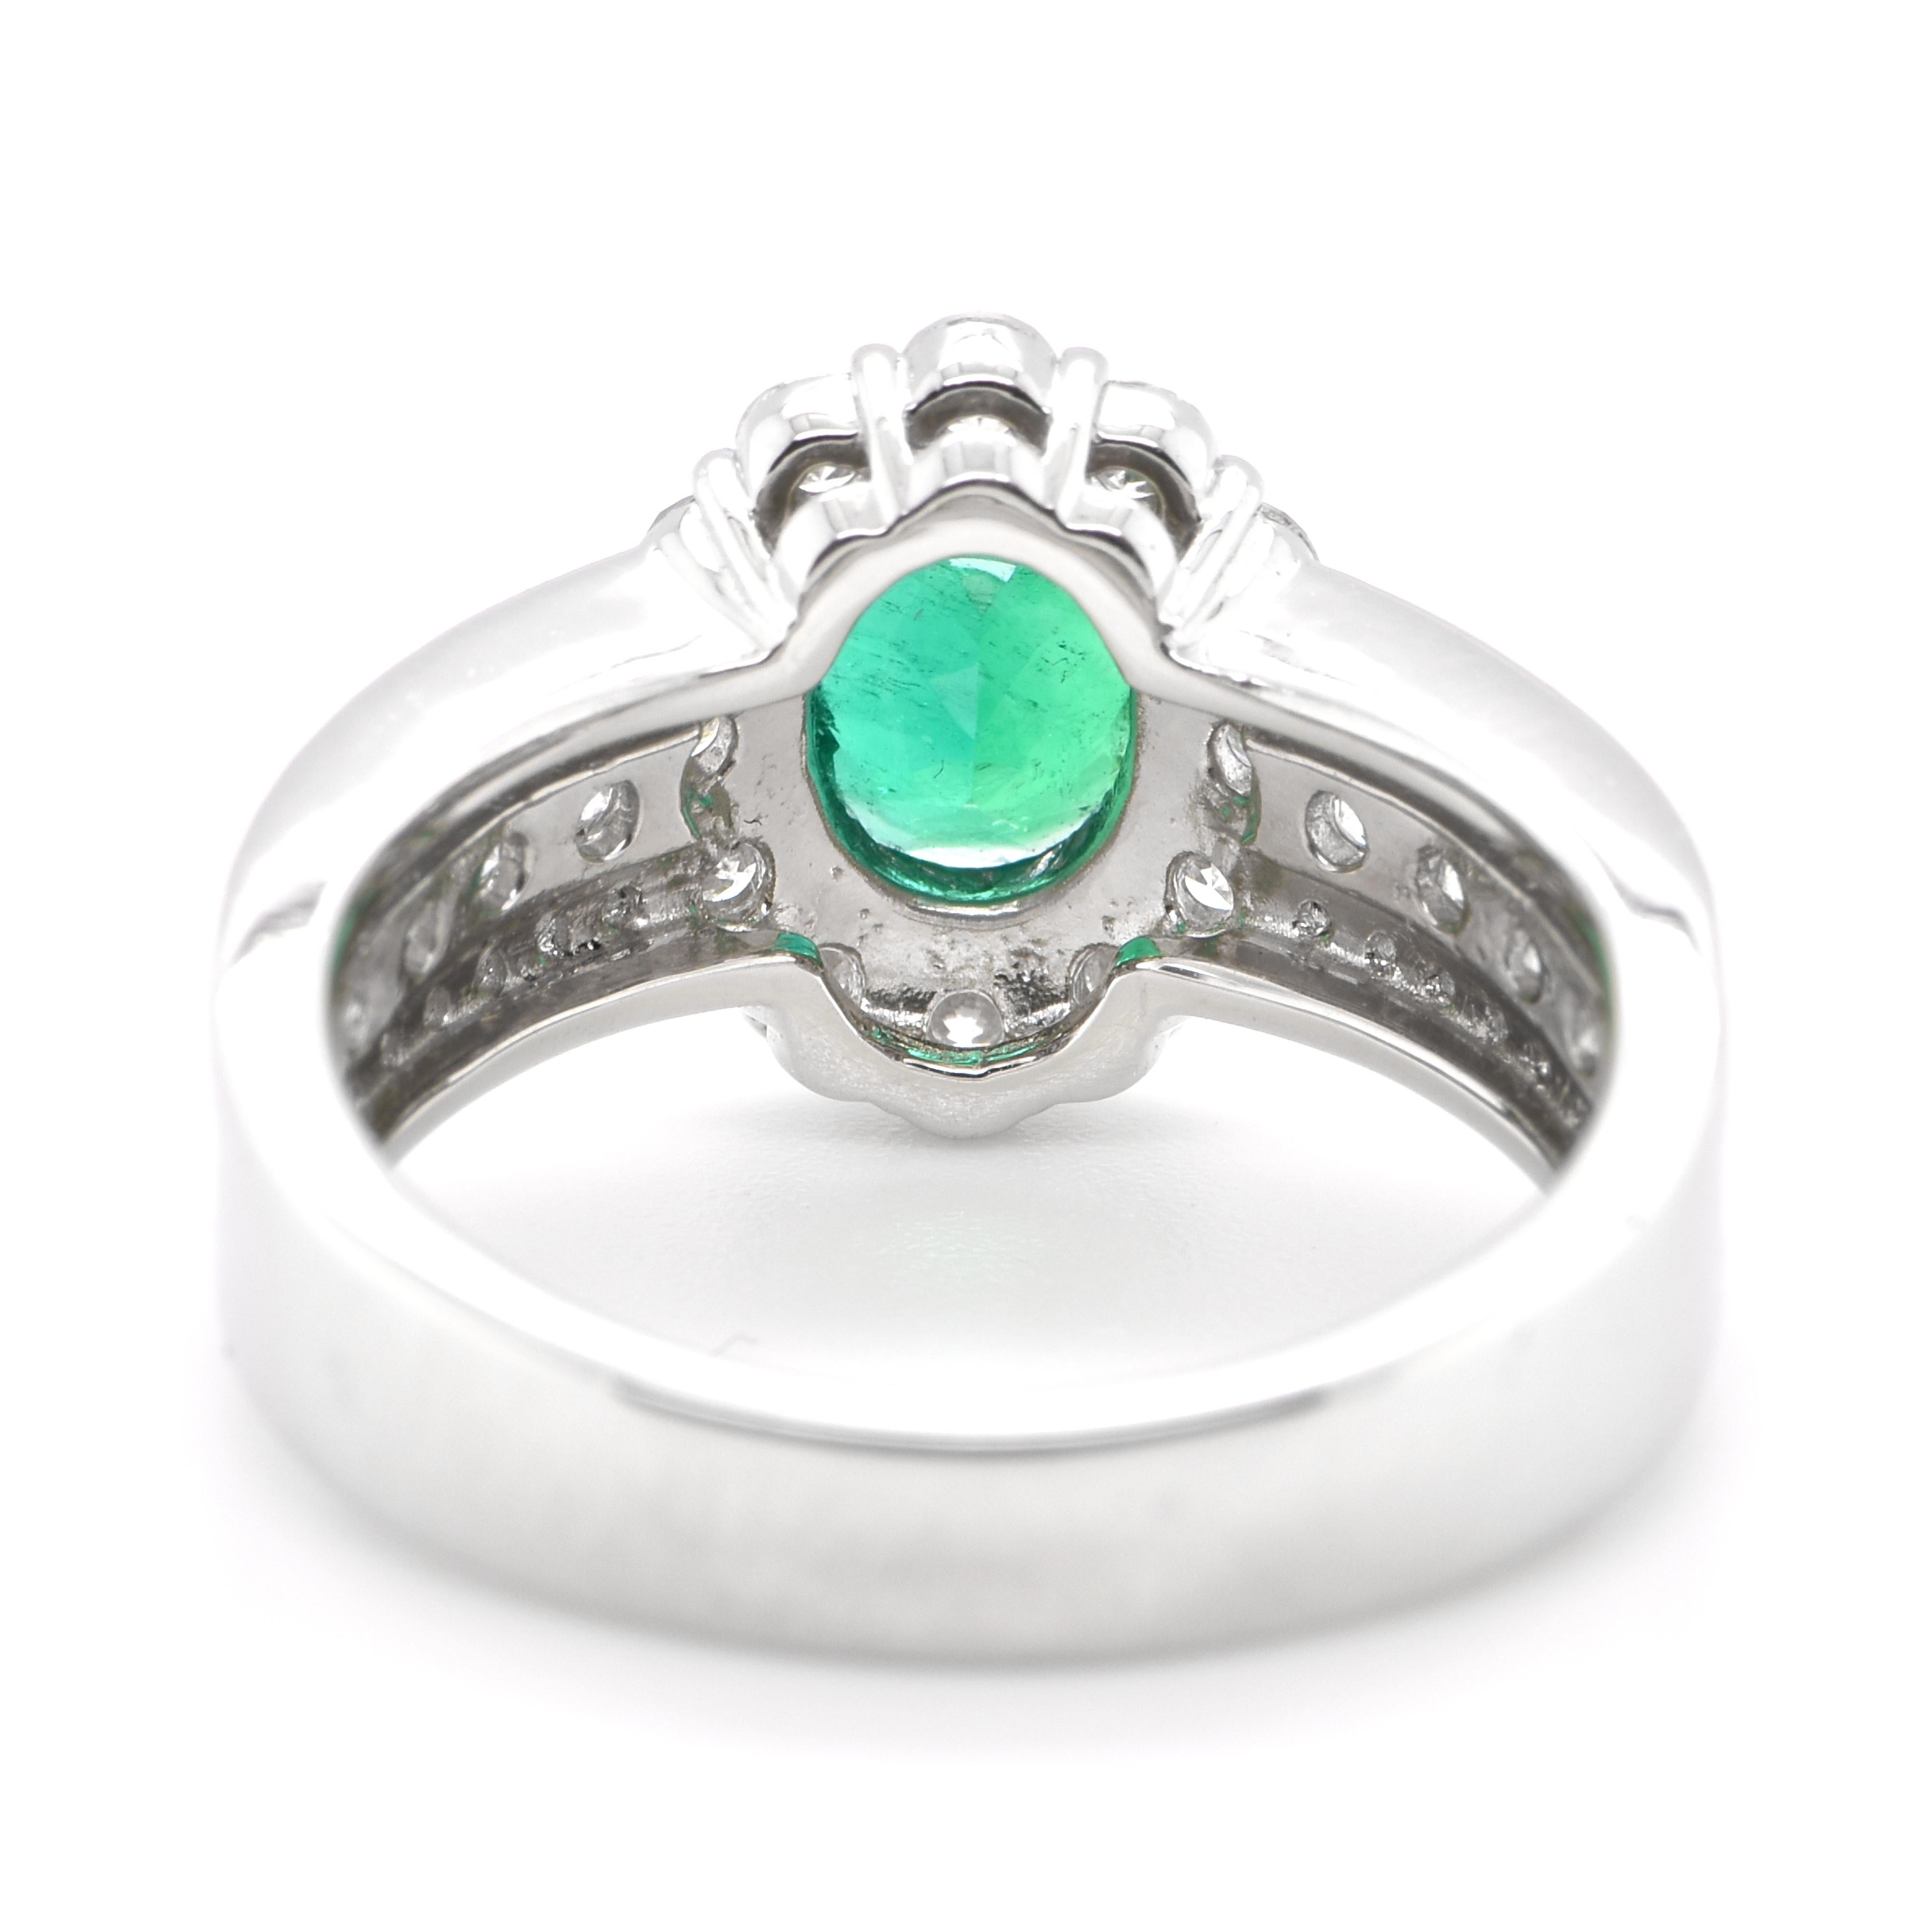 Women's 0.74 Carat Natural Untreated 'No-Oil' Emerald and Diamond Ring Set in Platinum